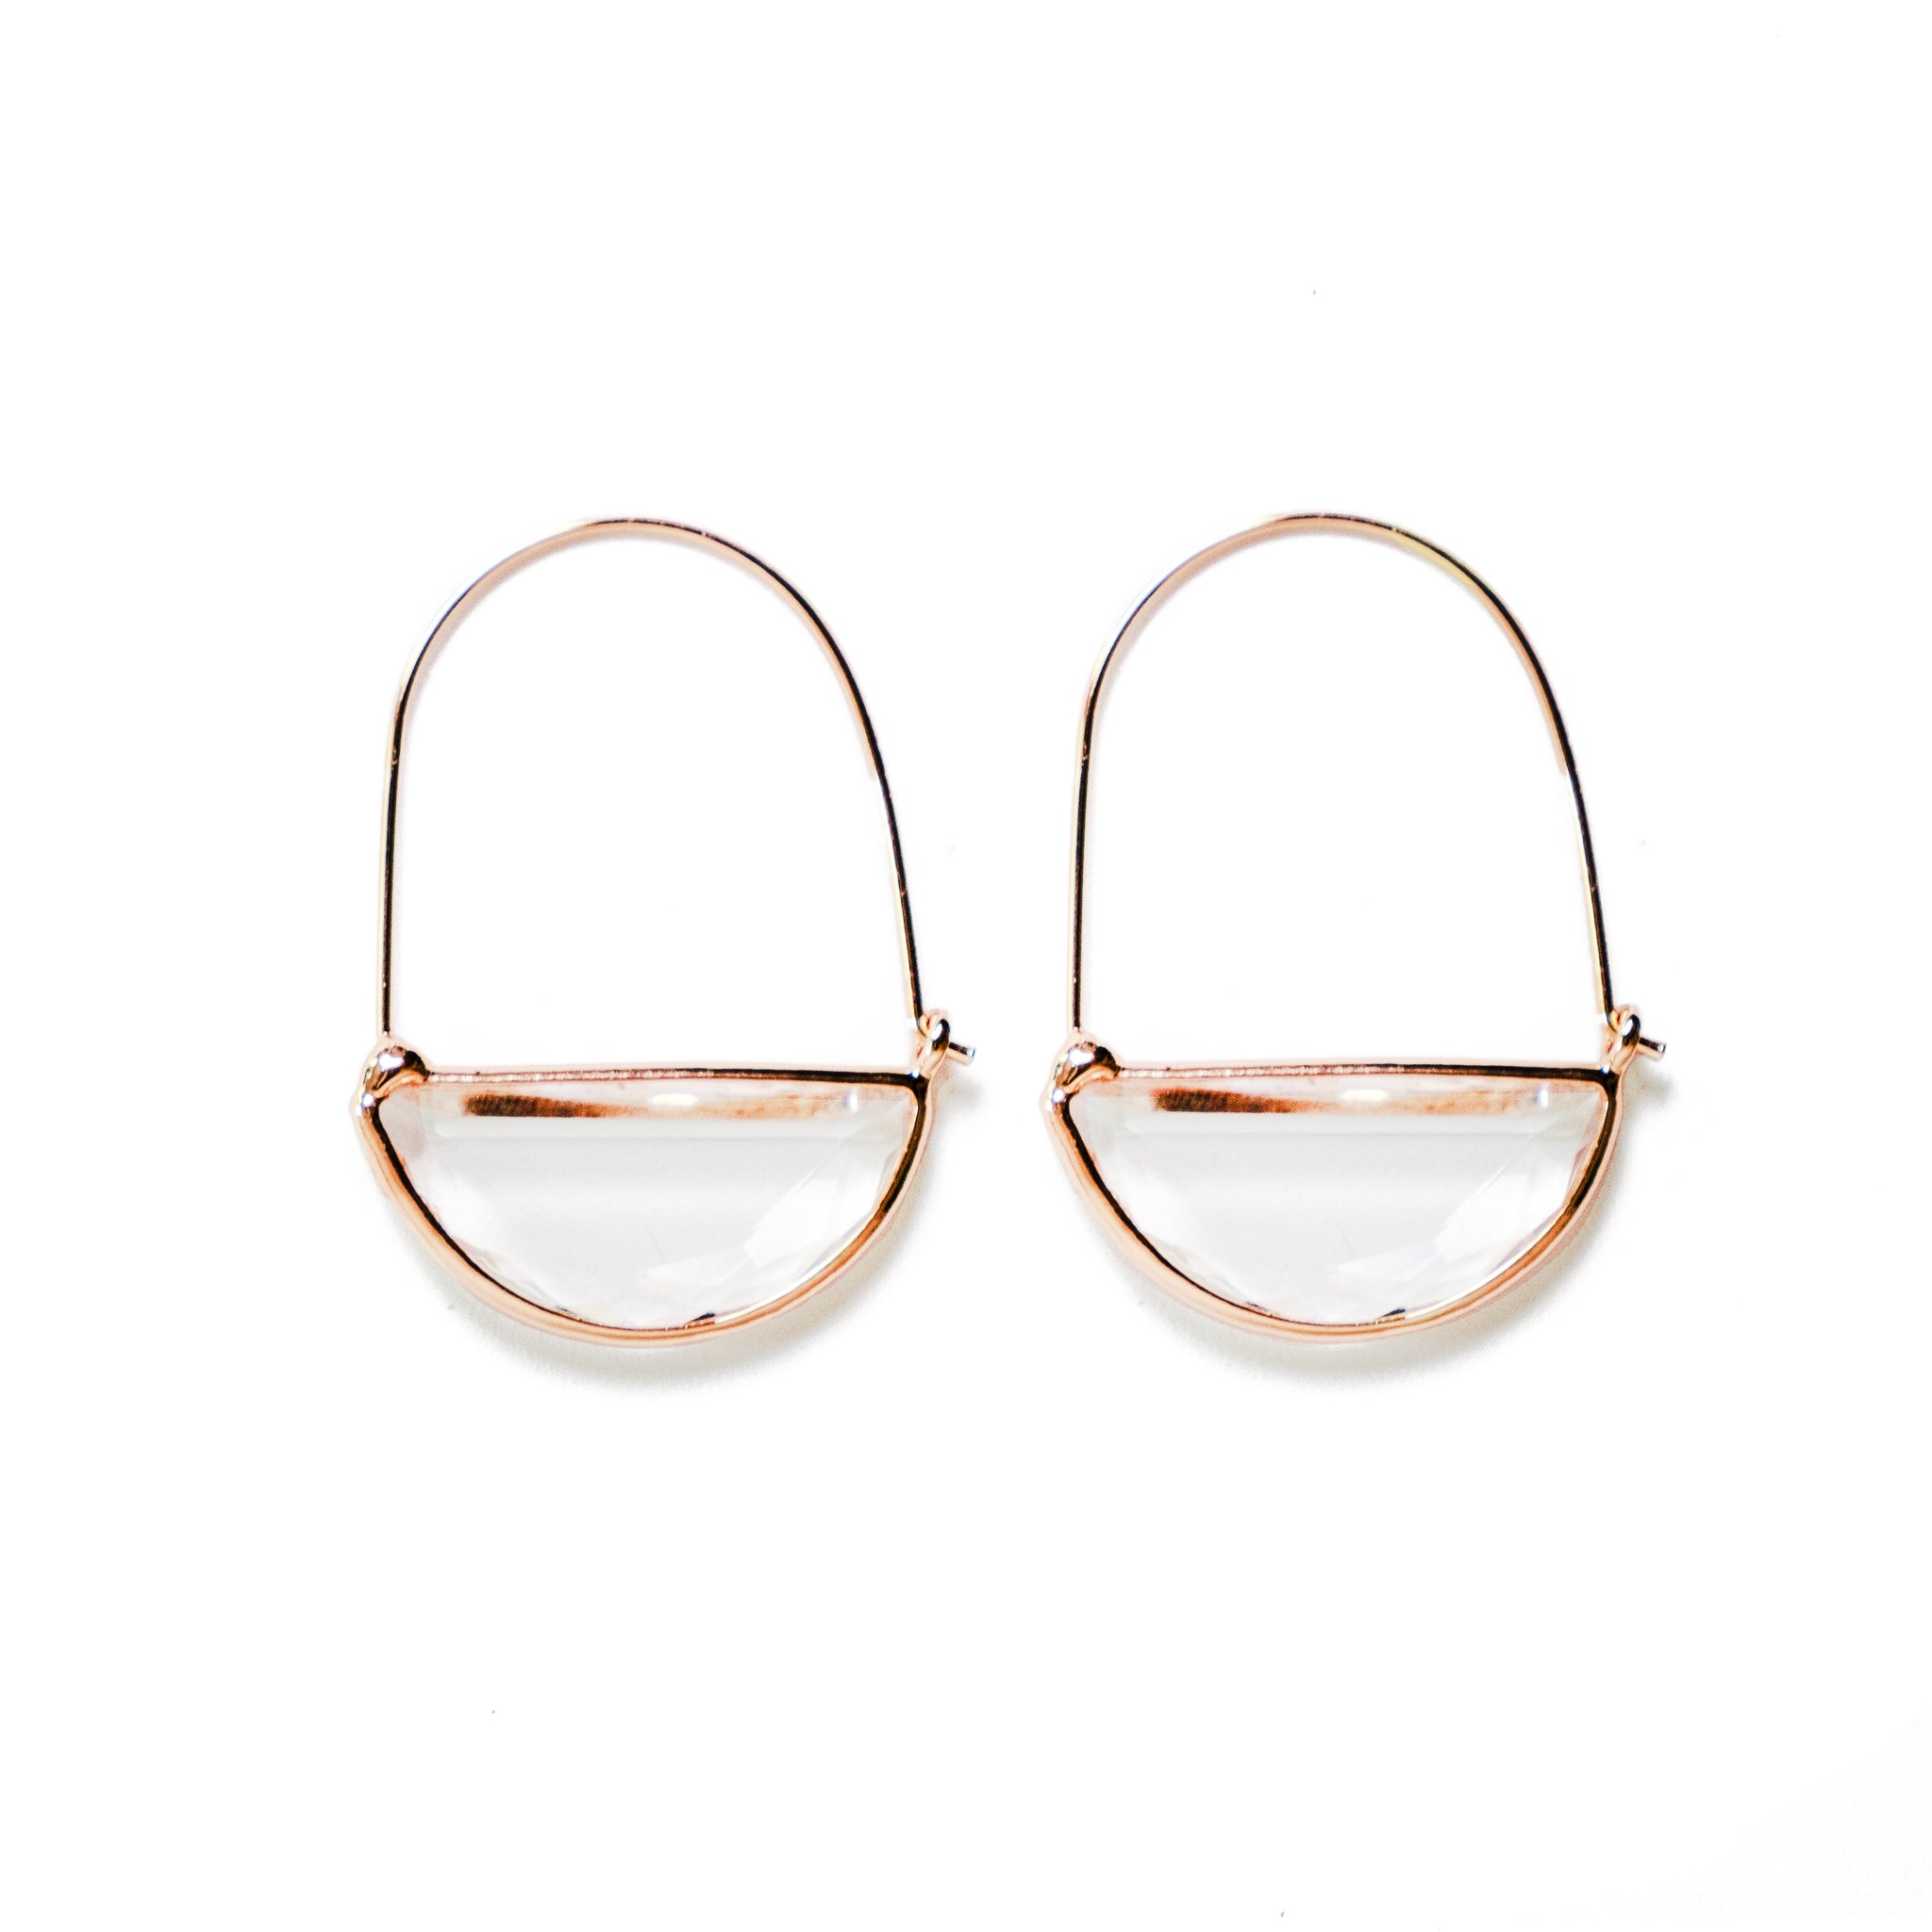 Hoops with clear glass droplets. Gold tone.